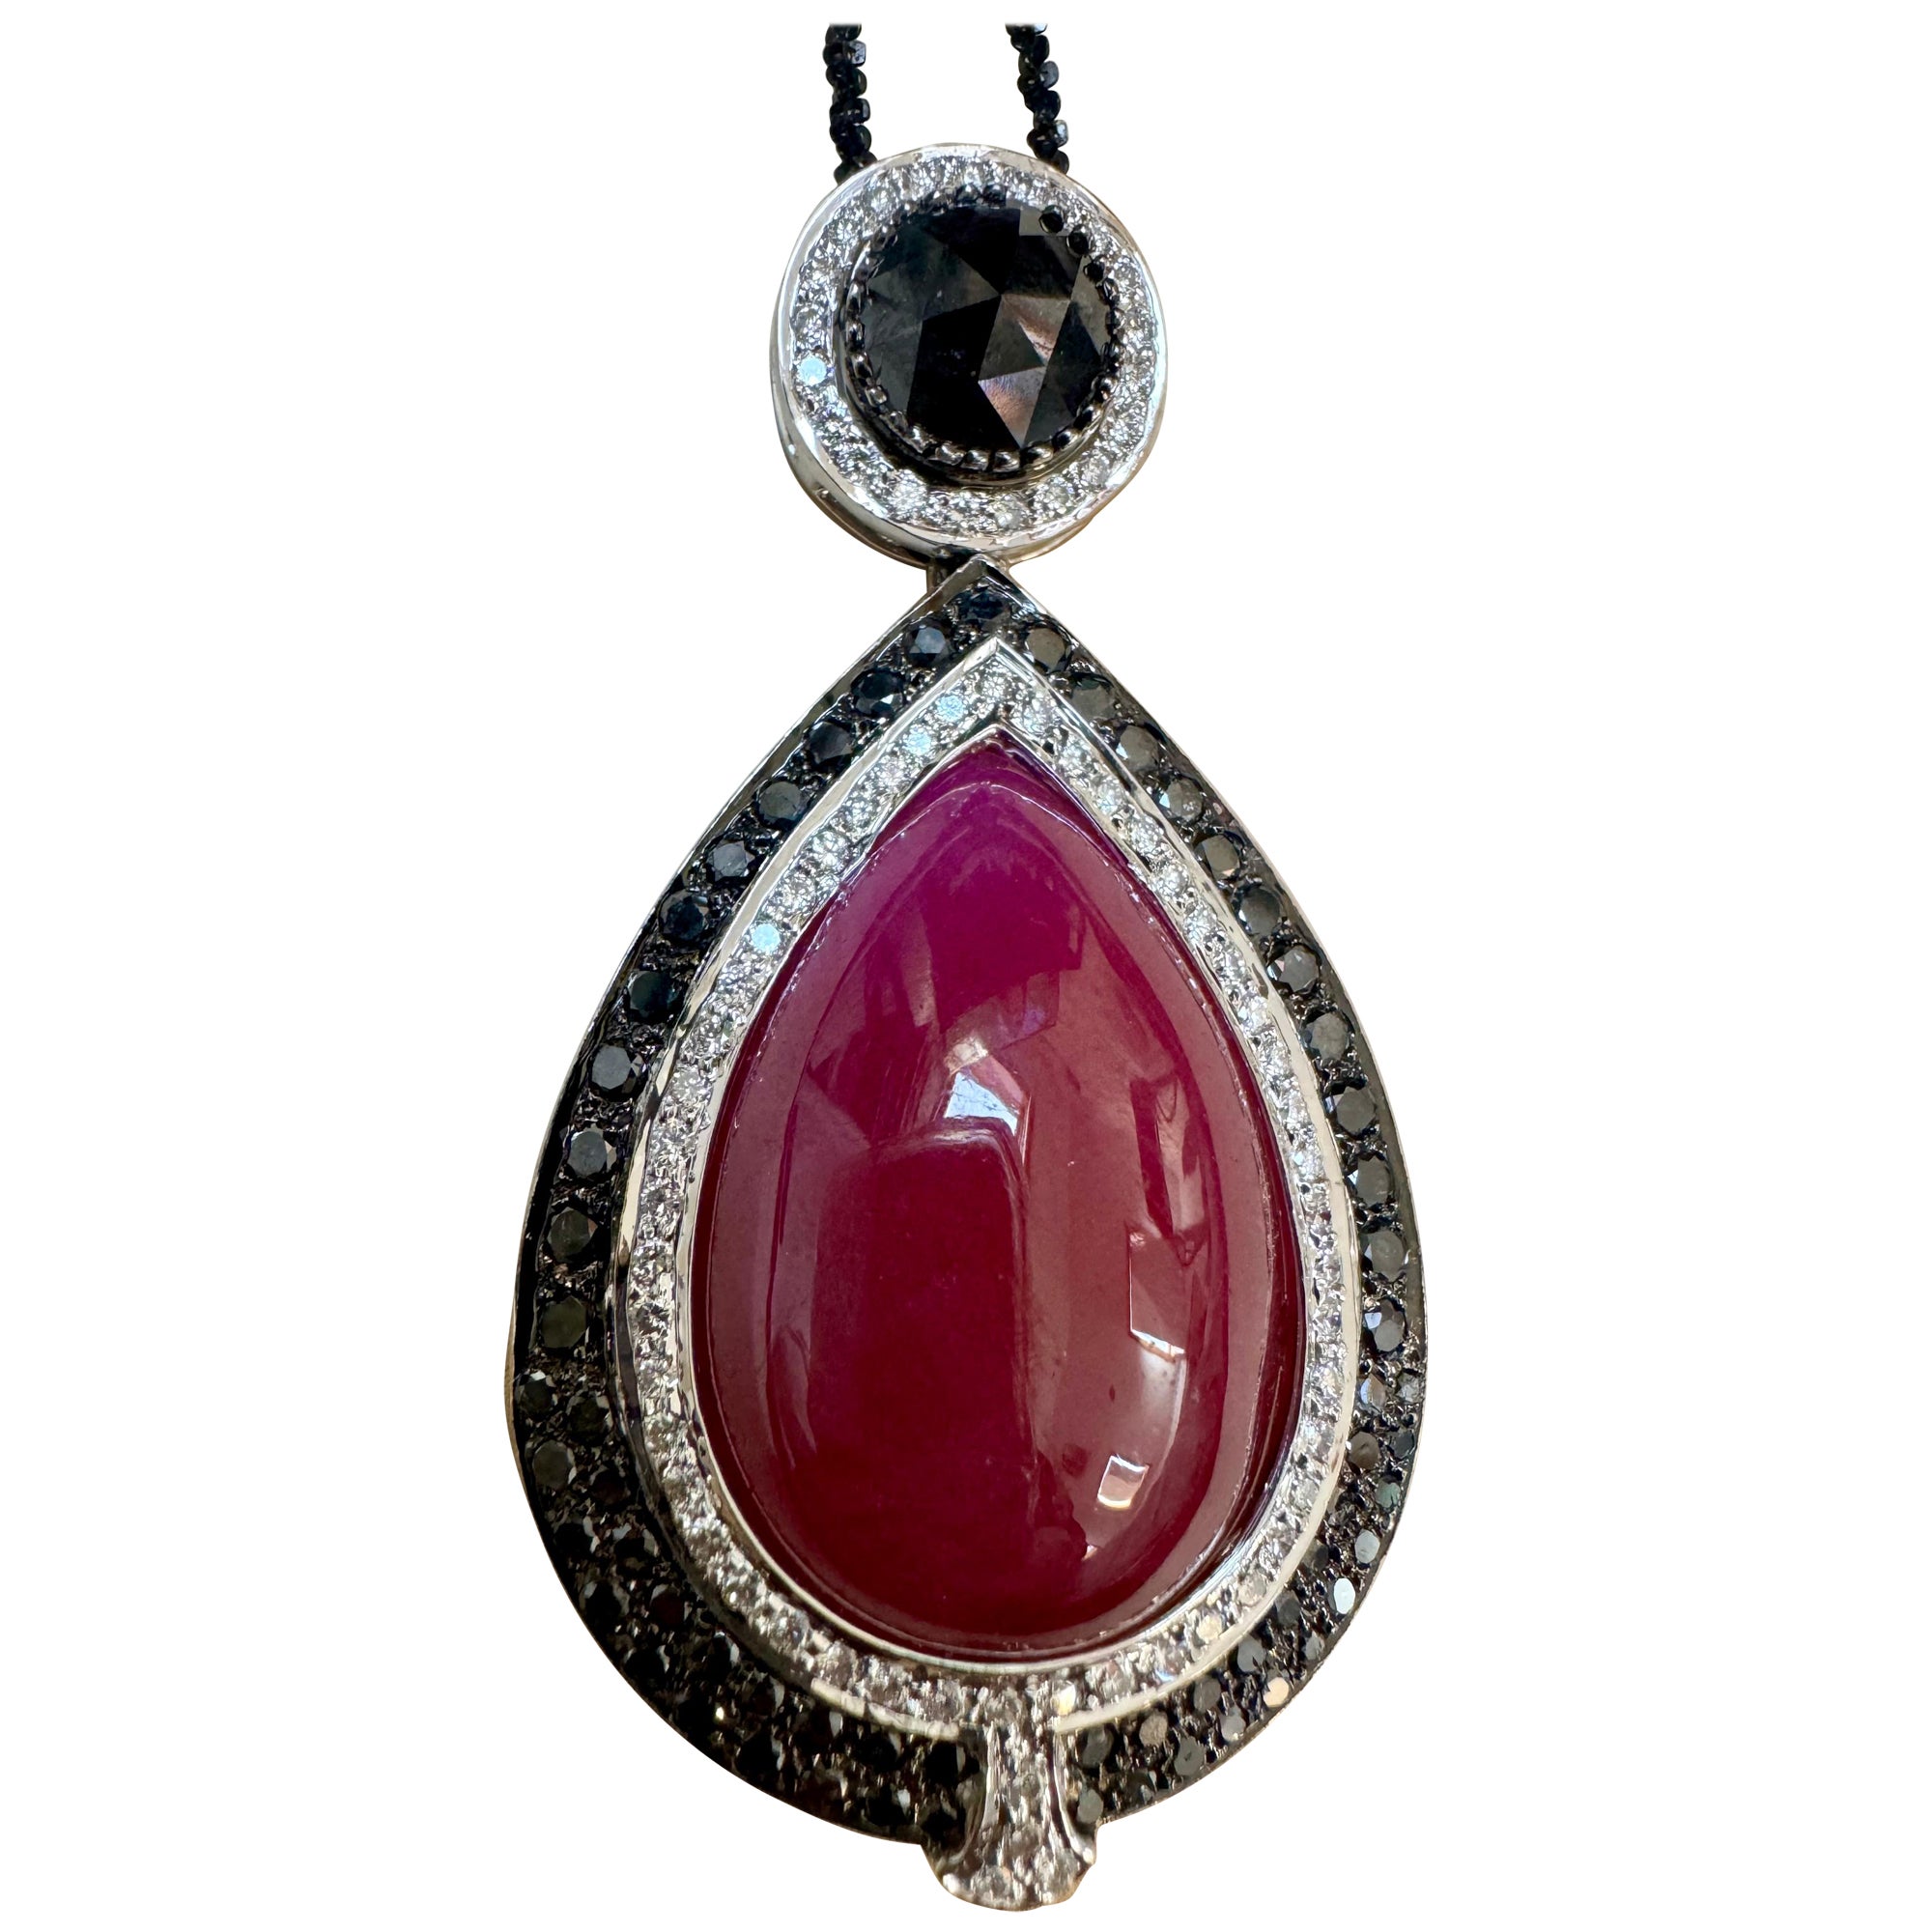 Vintage Large Pendant 40Ct Natural Ruby No Heat & Black & White Diamond 18KWG
This Large eye catching Pendant Necklace with is crafted from 18 Karat gold and features large Pear-shaped and a large Oval natural Rubies, totaling approximately 40